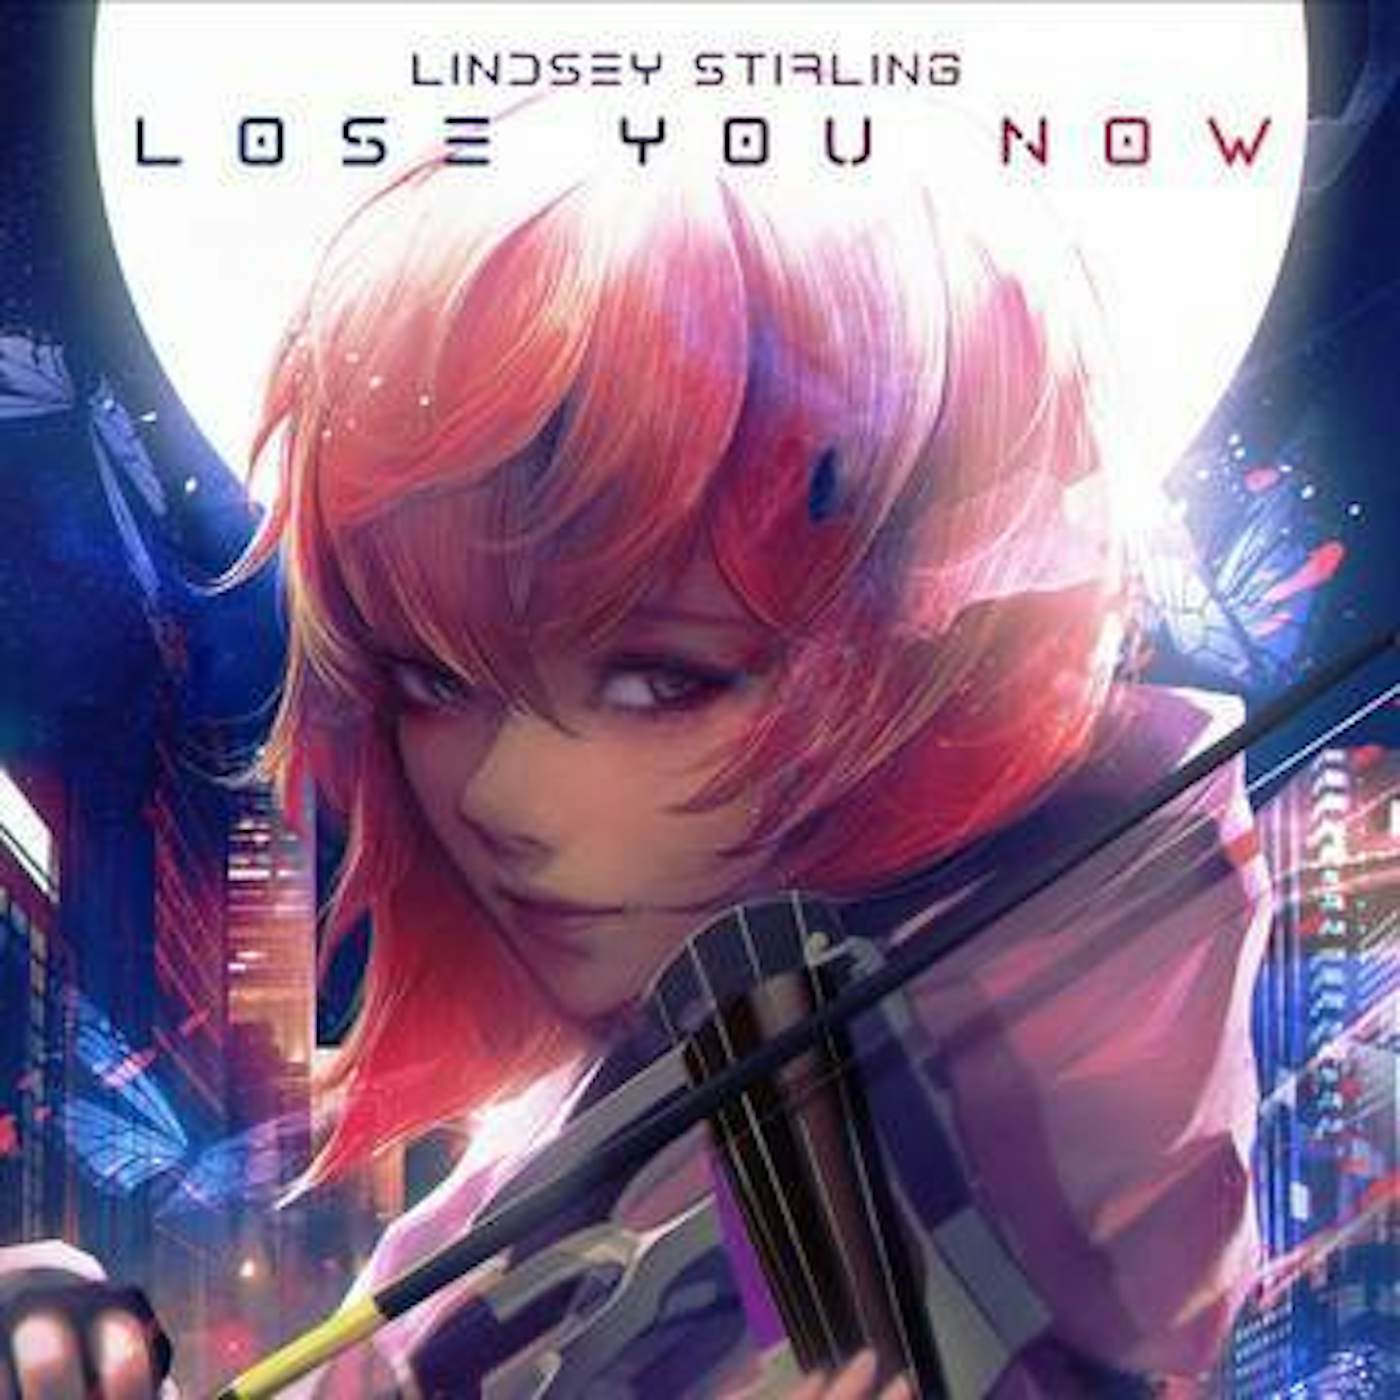 Lindsey Stirling LOSE YOU NOW (B-SIDE ETCHING) (RSD) Vinyl Record